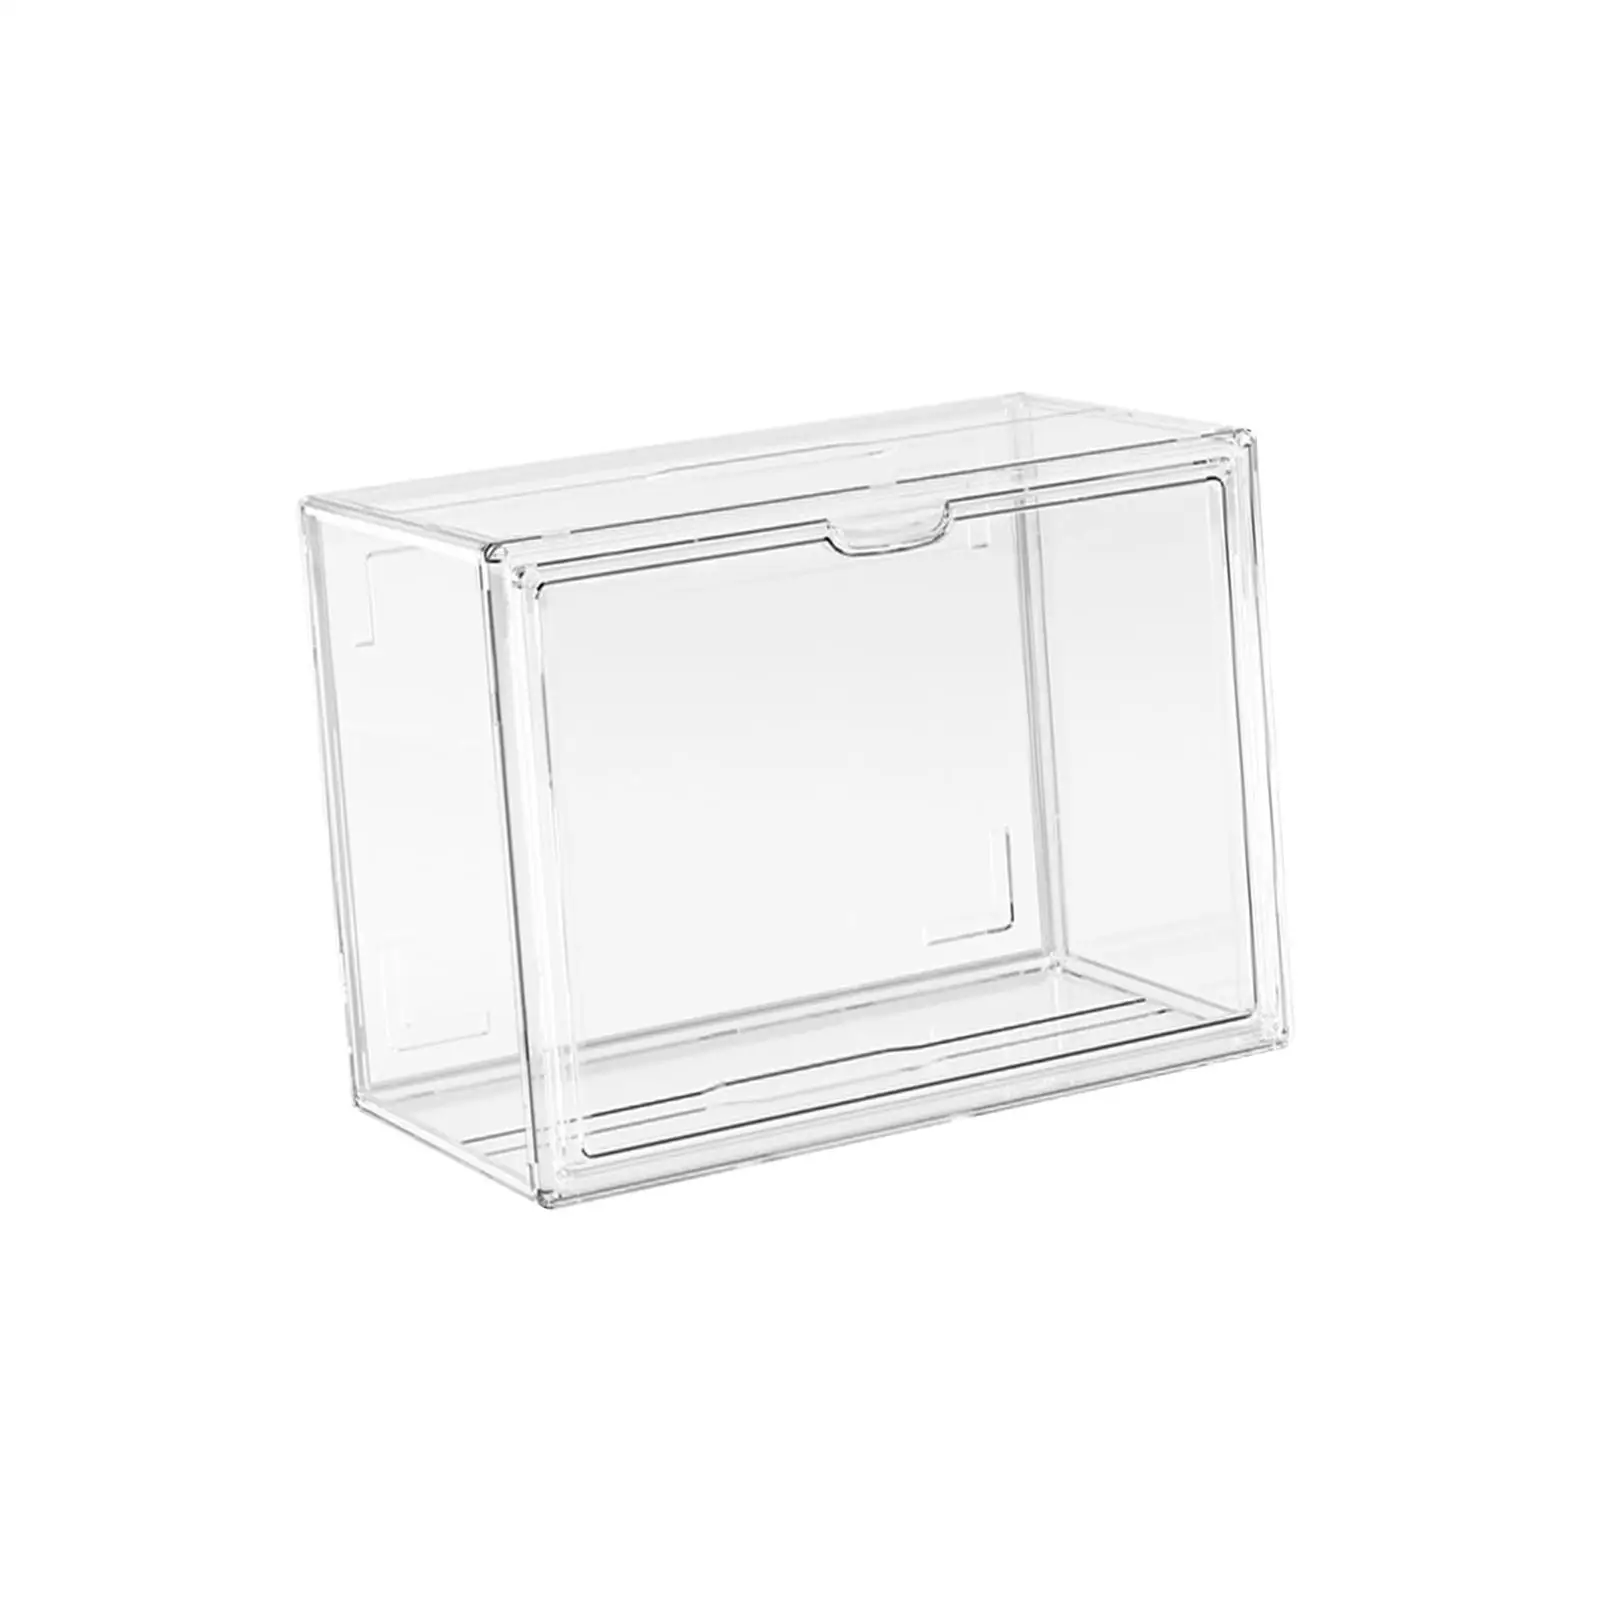 Acrylic Display Case Dustproof Multi Used protection Collectibles Display Showcase Countertop Display Box for Action Figure Toys